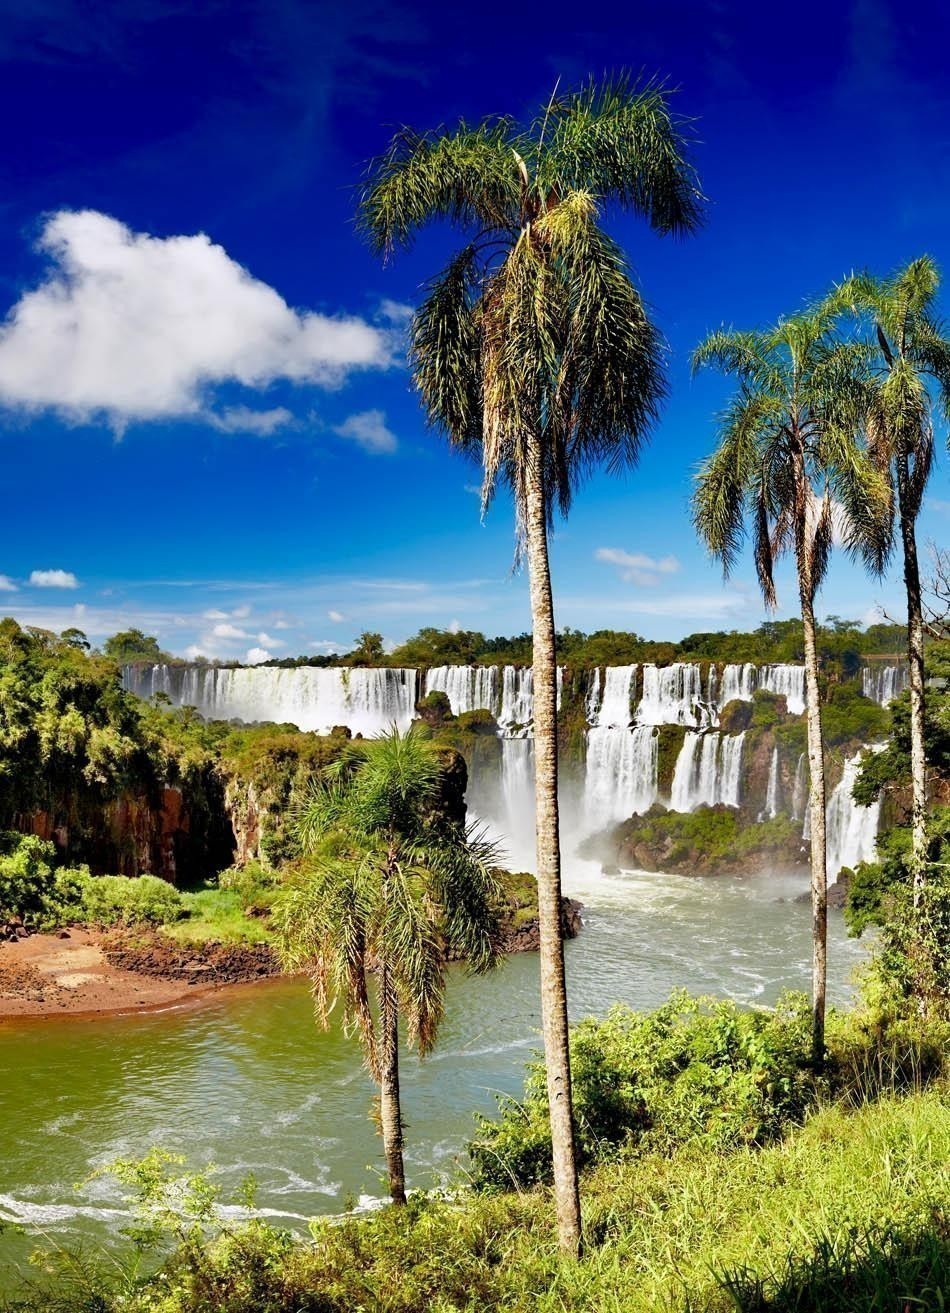 Iguassu Falls, the largest series of waterfalls of the world, located at the Brazilian and Argentinian border | Brazil Travel Guide